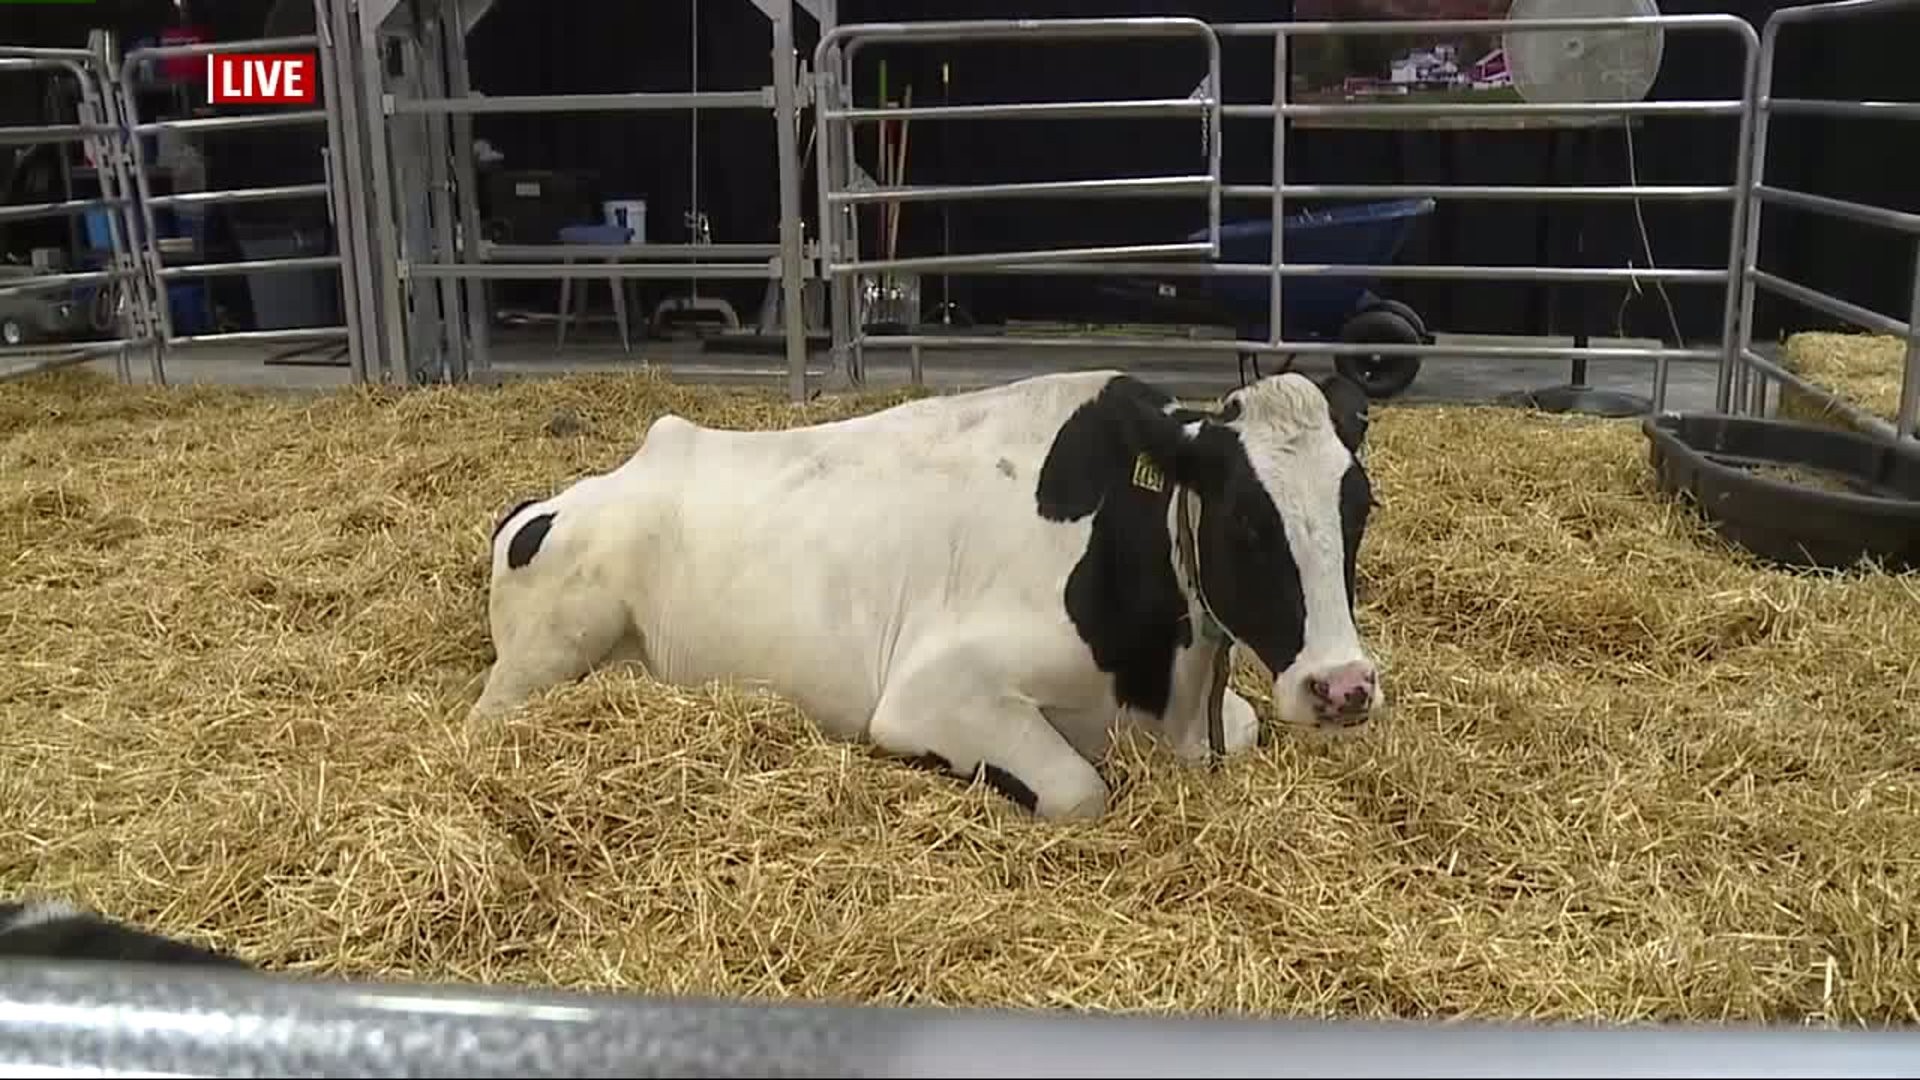 Checking out some of the animal exhibits at the Pennsylvania Farm Show in Harrisburg